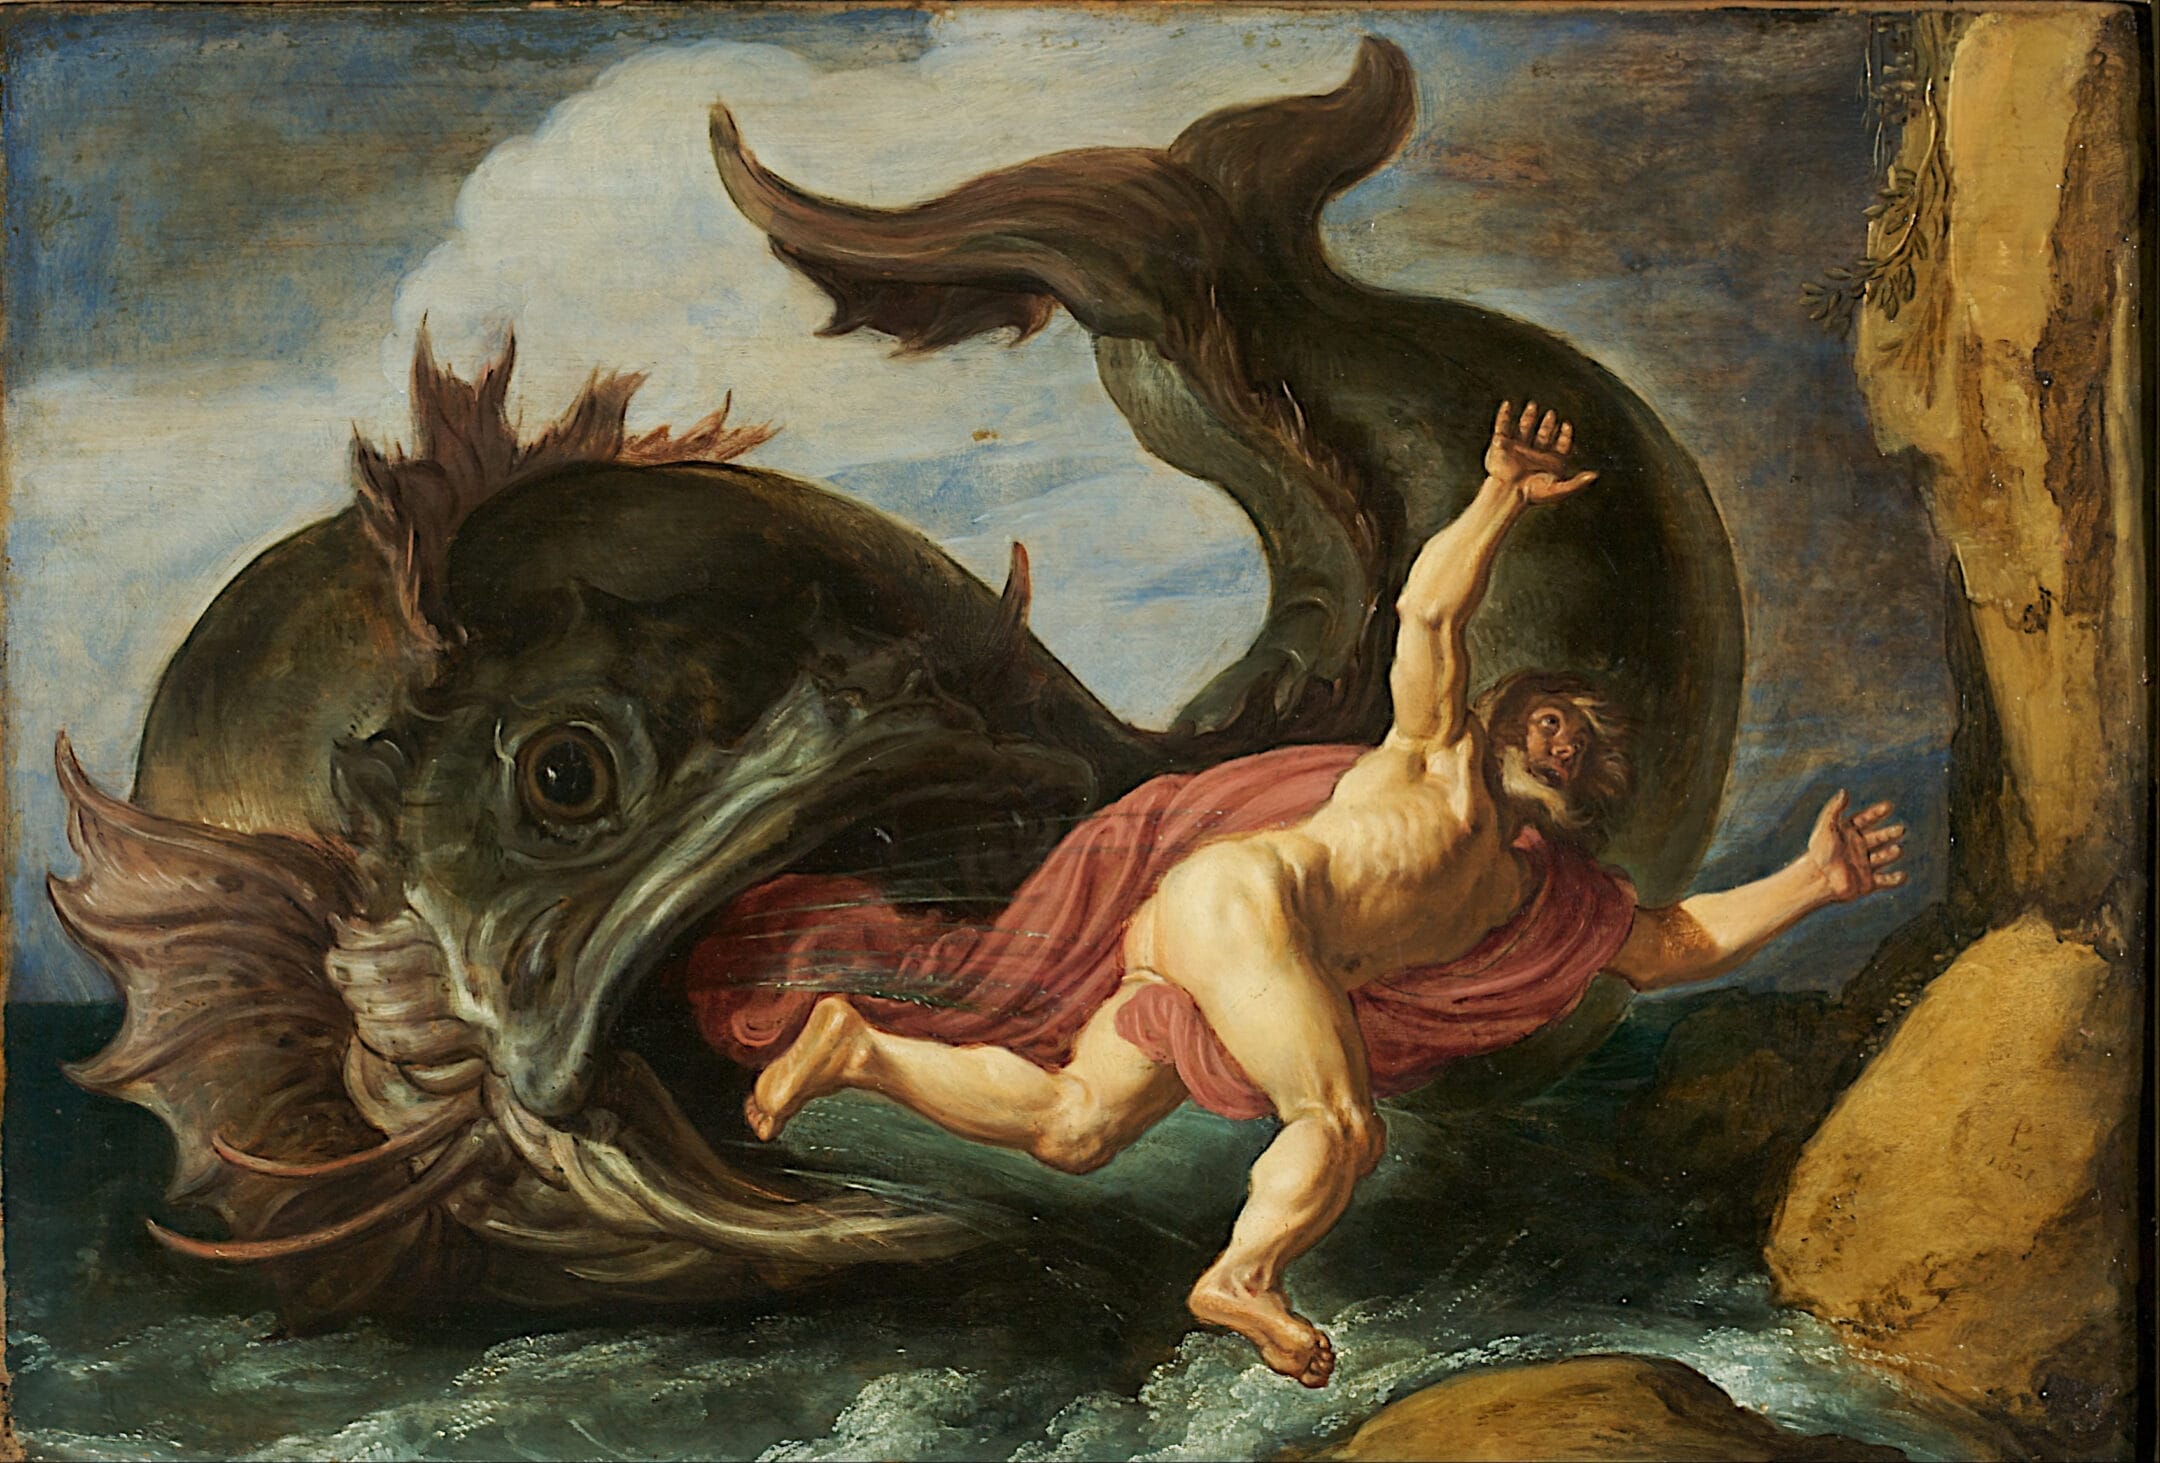 An oil painting by Pieter Lastman (1583-1633 CE) depicting the prophet Jonah about to be swallowed by a giant fish, the story of Jonah is in the Book of Jonah in the Bible's Old Testament.